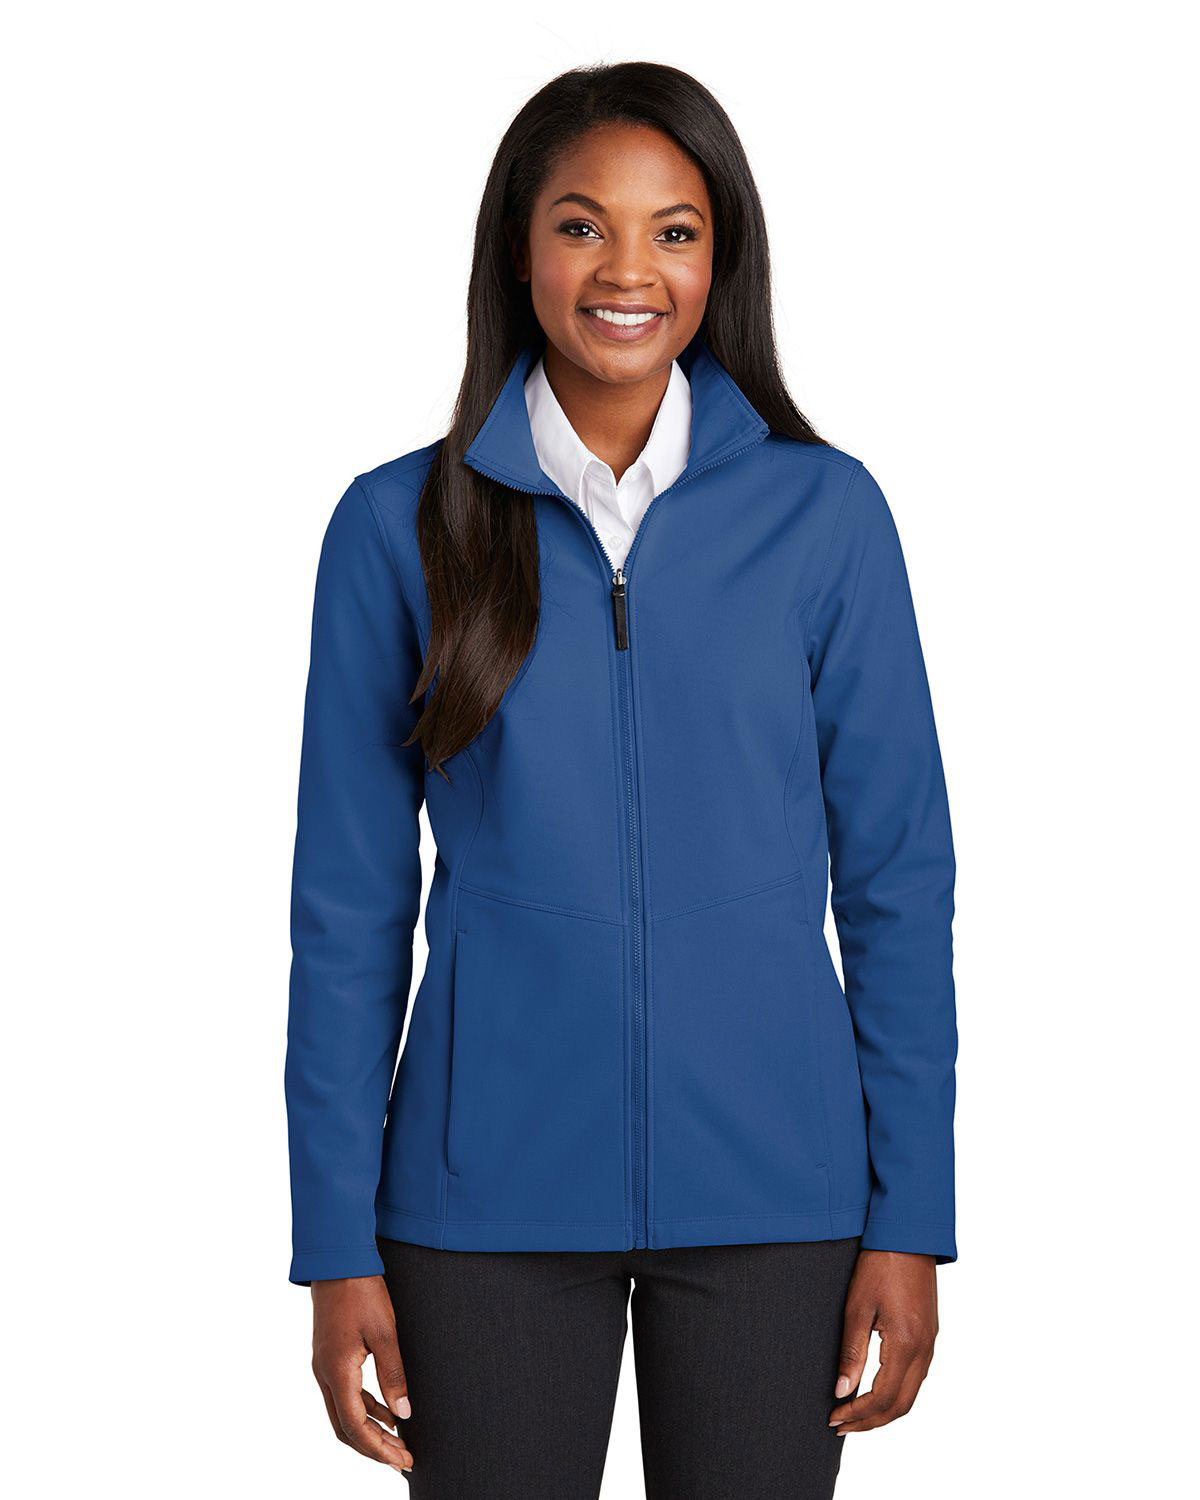 Port Authority L901 Women Collective Soft Shell Jacket